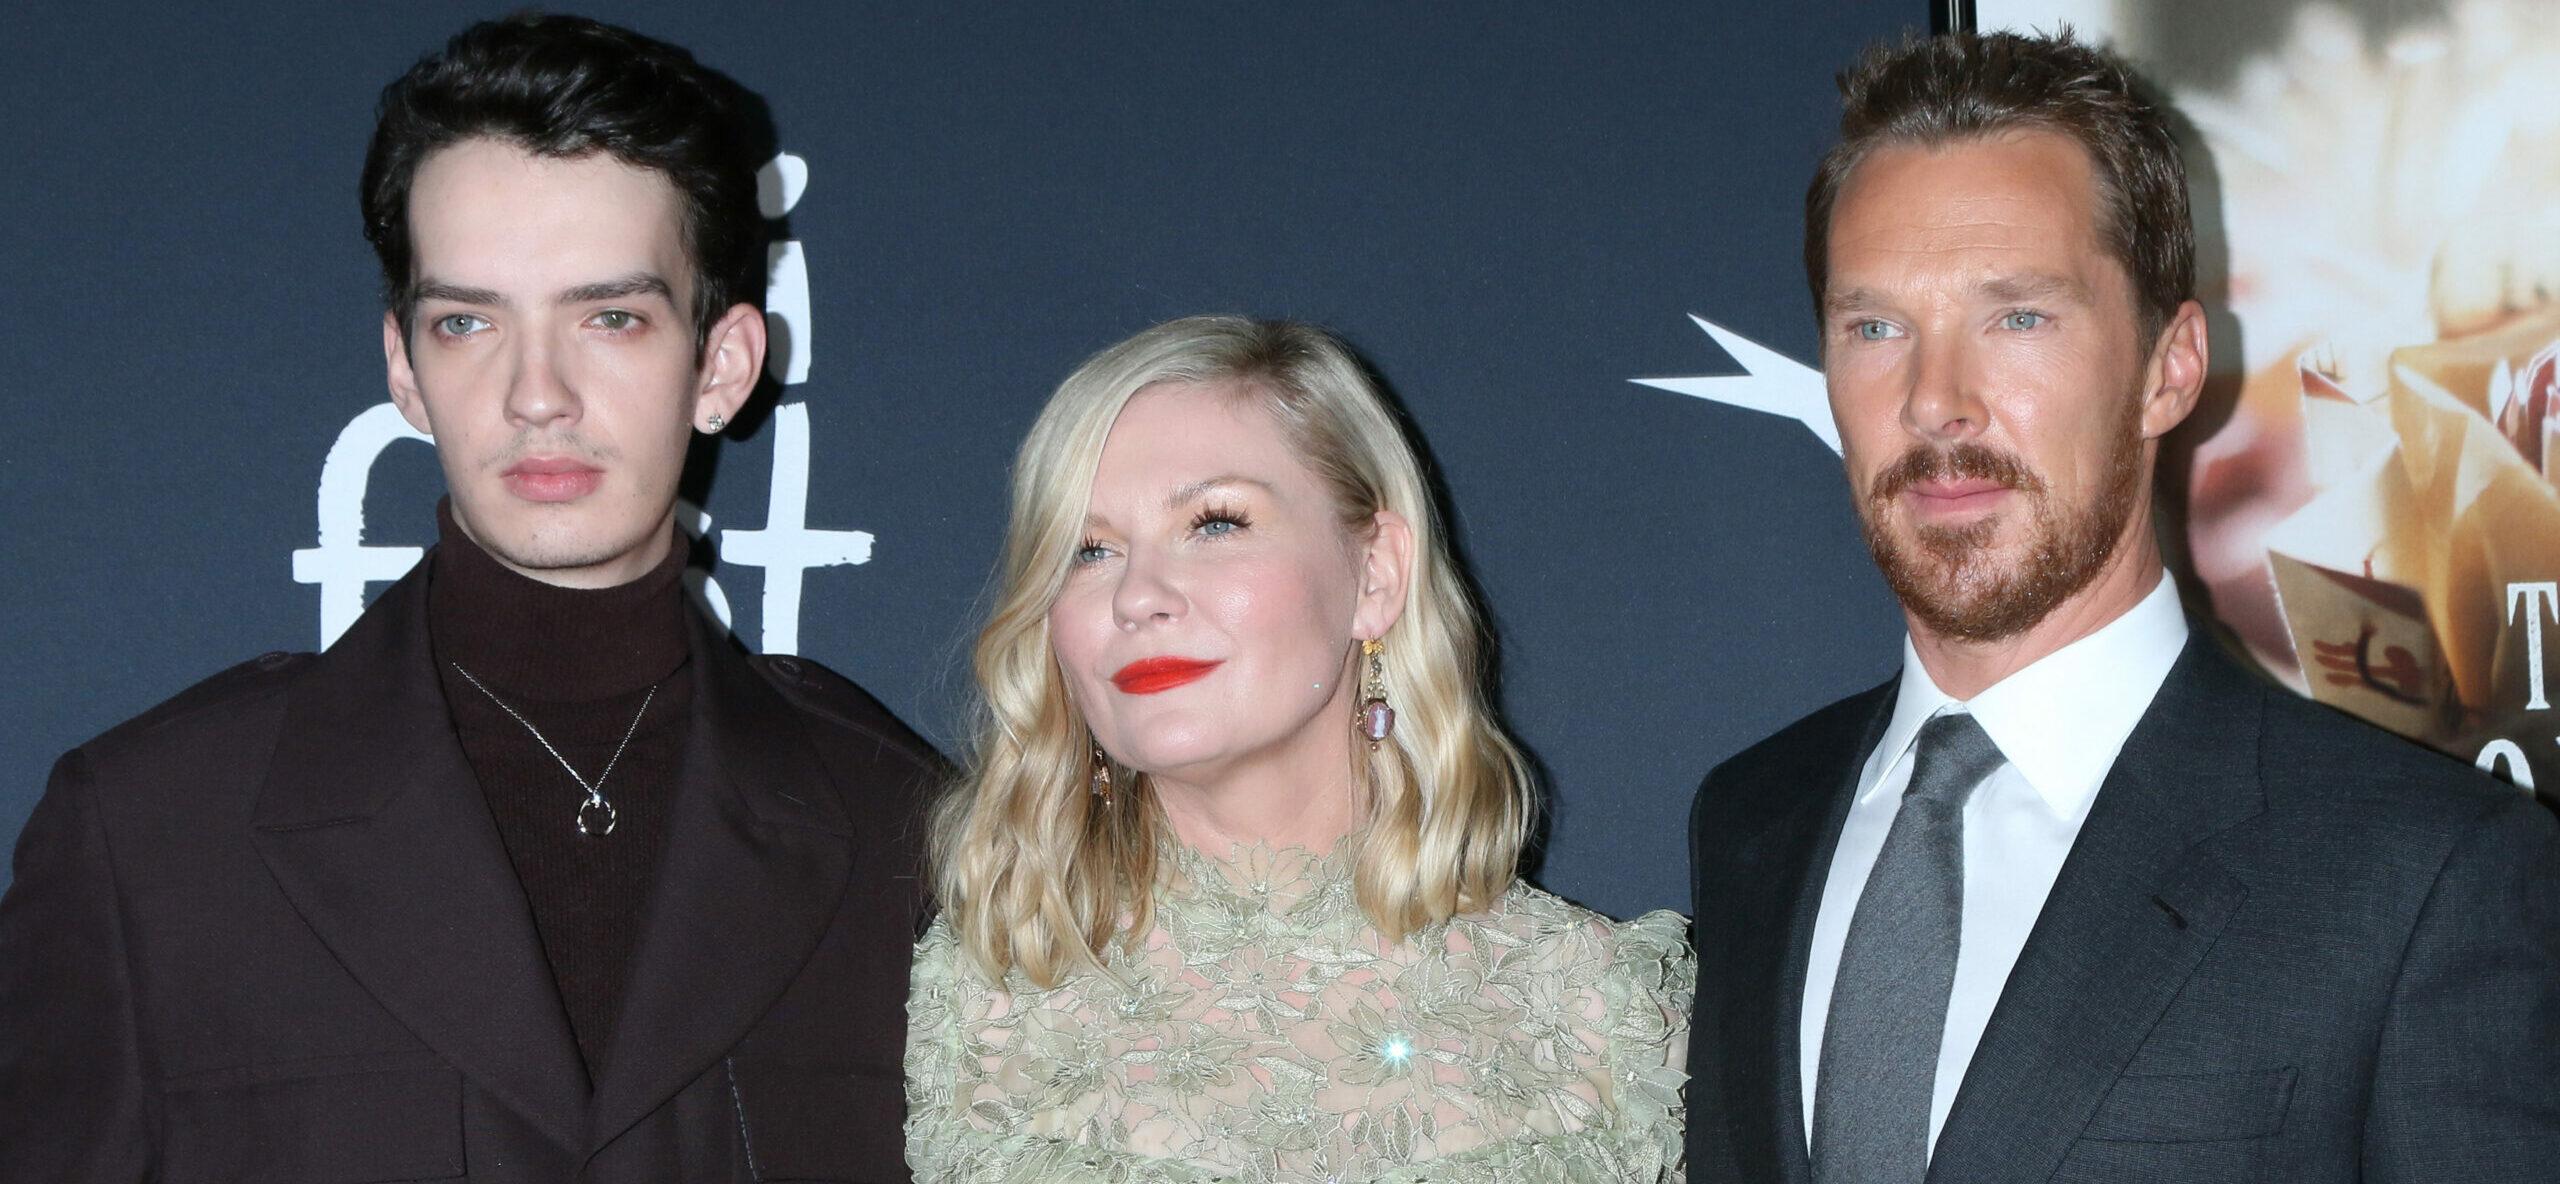 Kodi Smit-McPhee, Kirsten Dunst, Benedict Cumberbatch at the AFI Fest - The Power of The Dog LA Premiere at TCL Chinese Theater IMAX